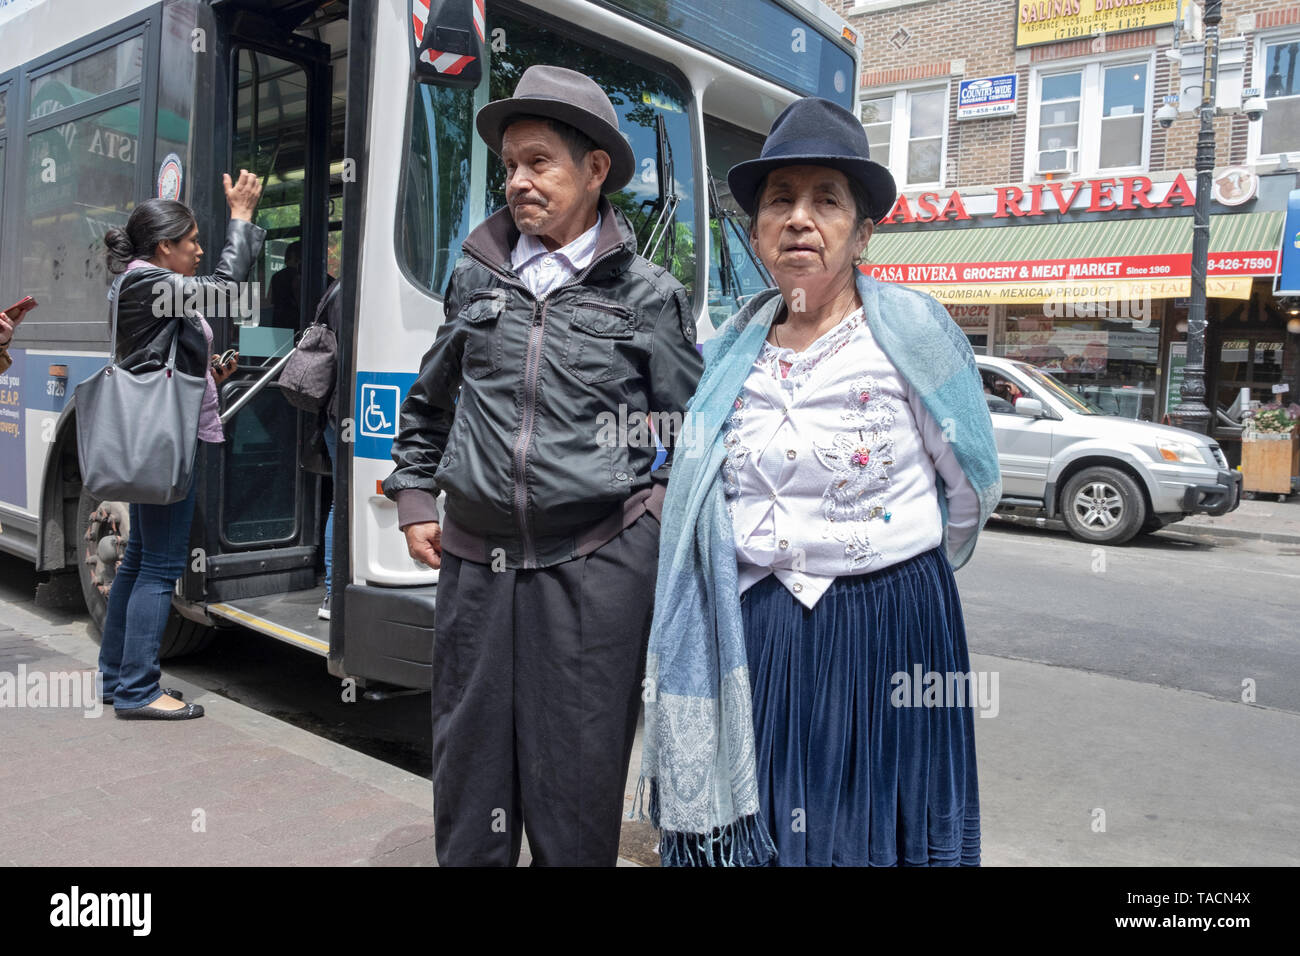 A couple that appear to be Mexican immigrants wait outside a tore on 82nd Street in Jackson Heights, Queens, New York City. Stock Photo